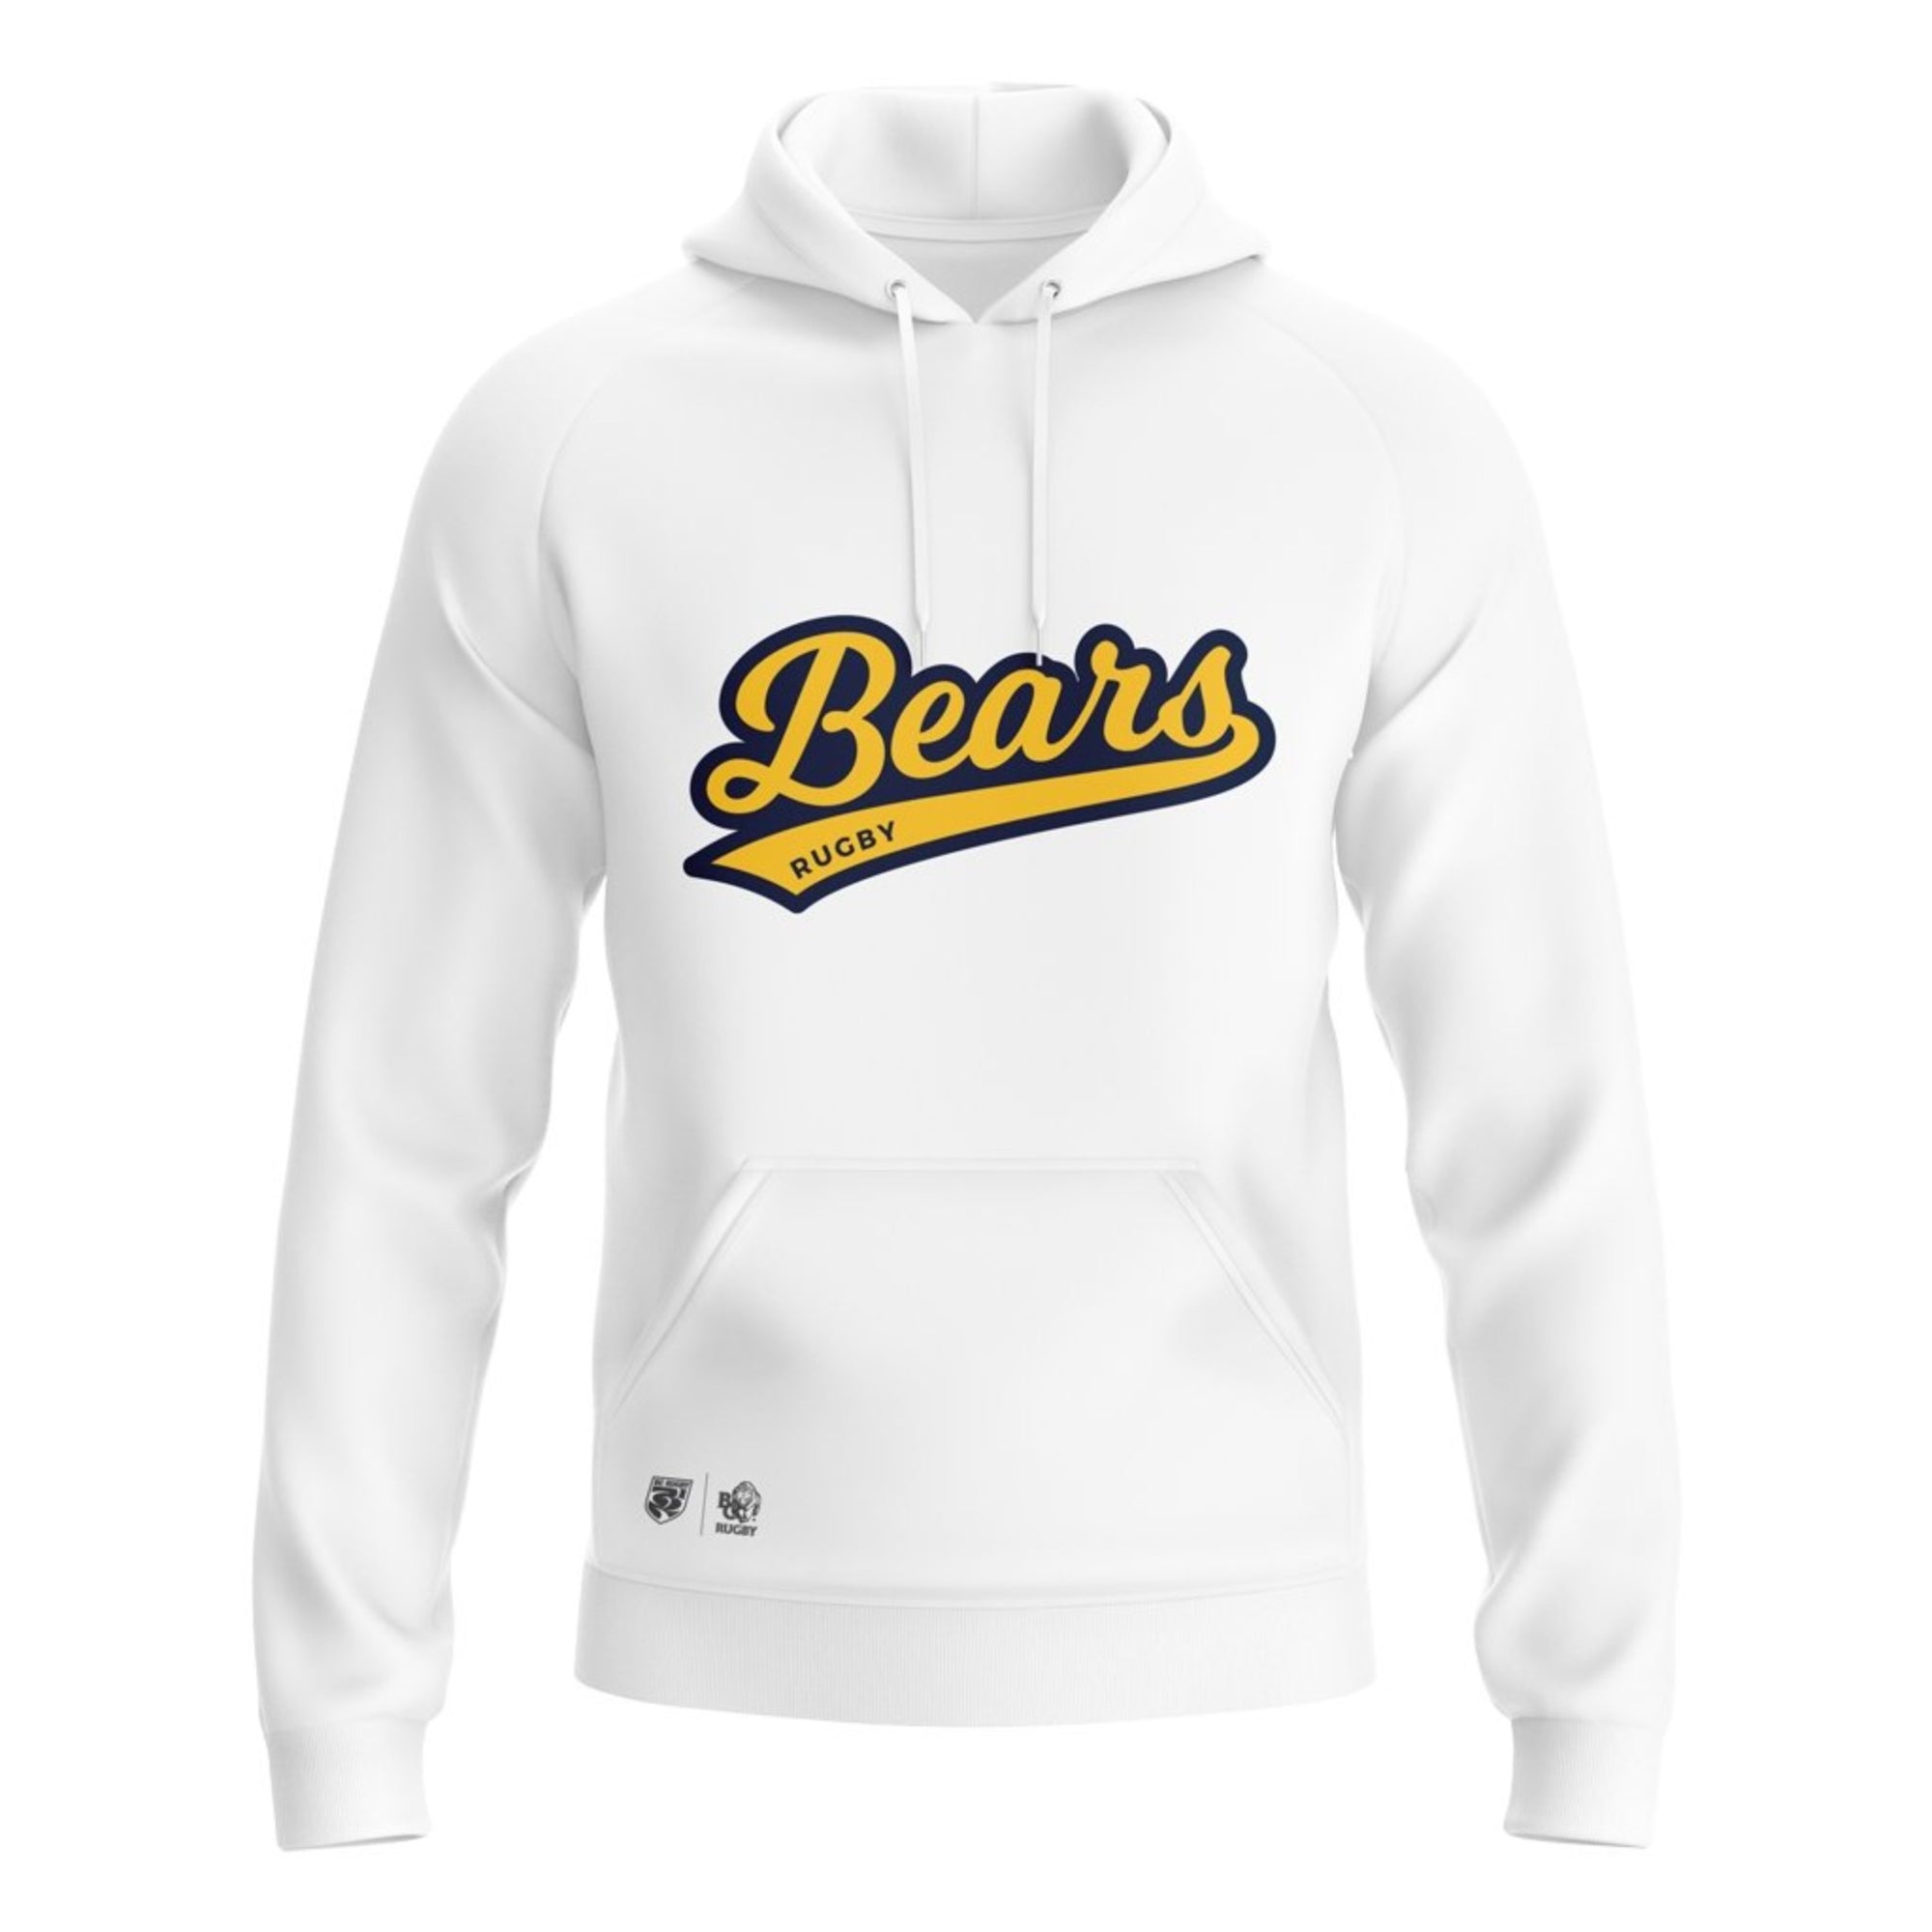 BC Rugby 2021 "Bears" Hoodie - Youth Unisex - www.therugbyshop.com www.therugbyshop.com YOUTH / NAVY / S XIX Brands HOODIES BC Rugby 2021 "Bears" Hoodie - Youth Unisex